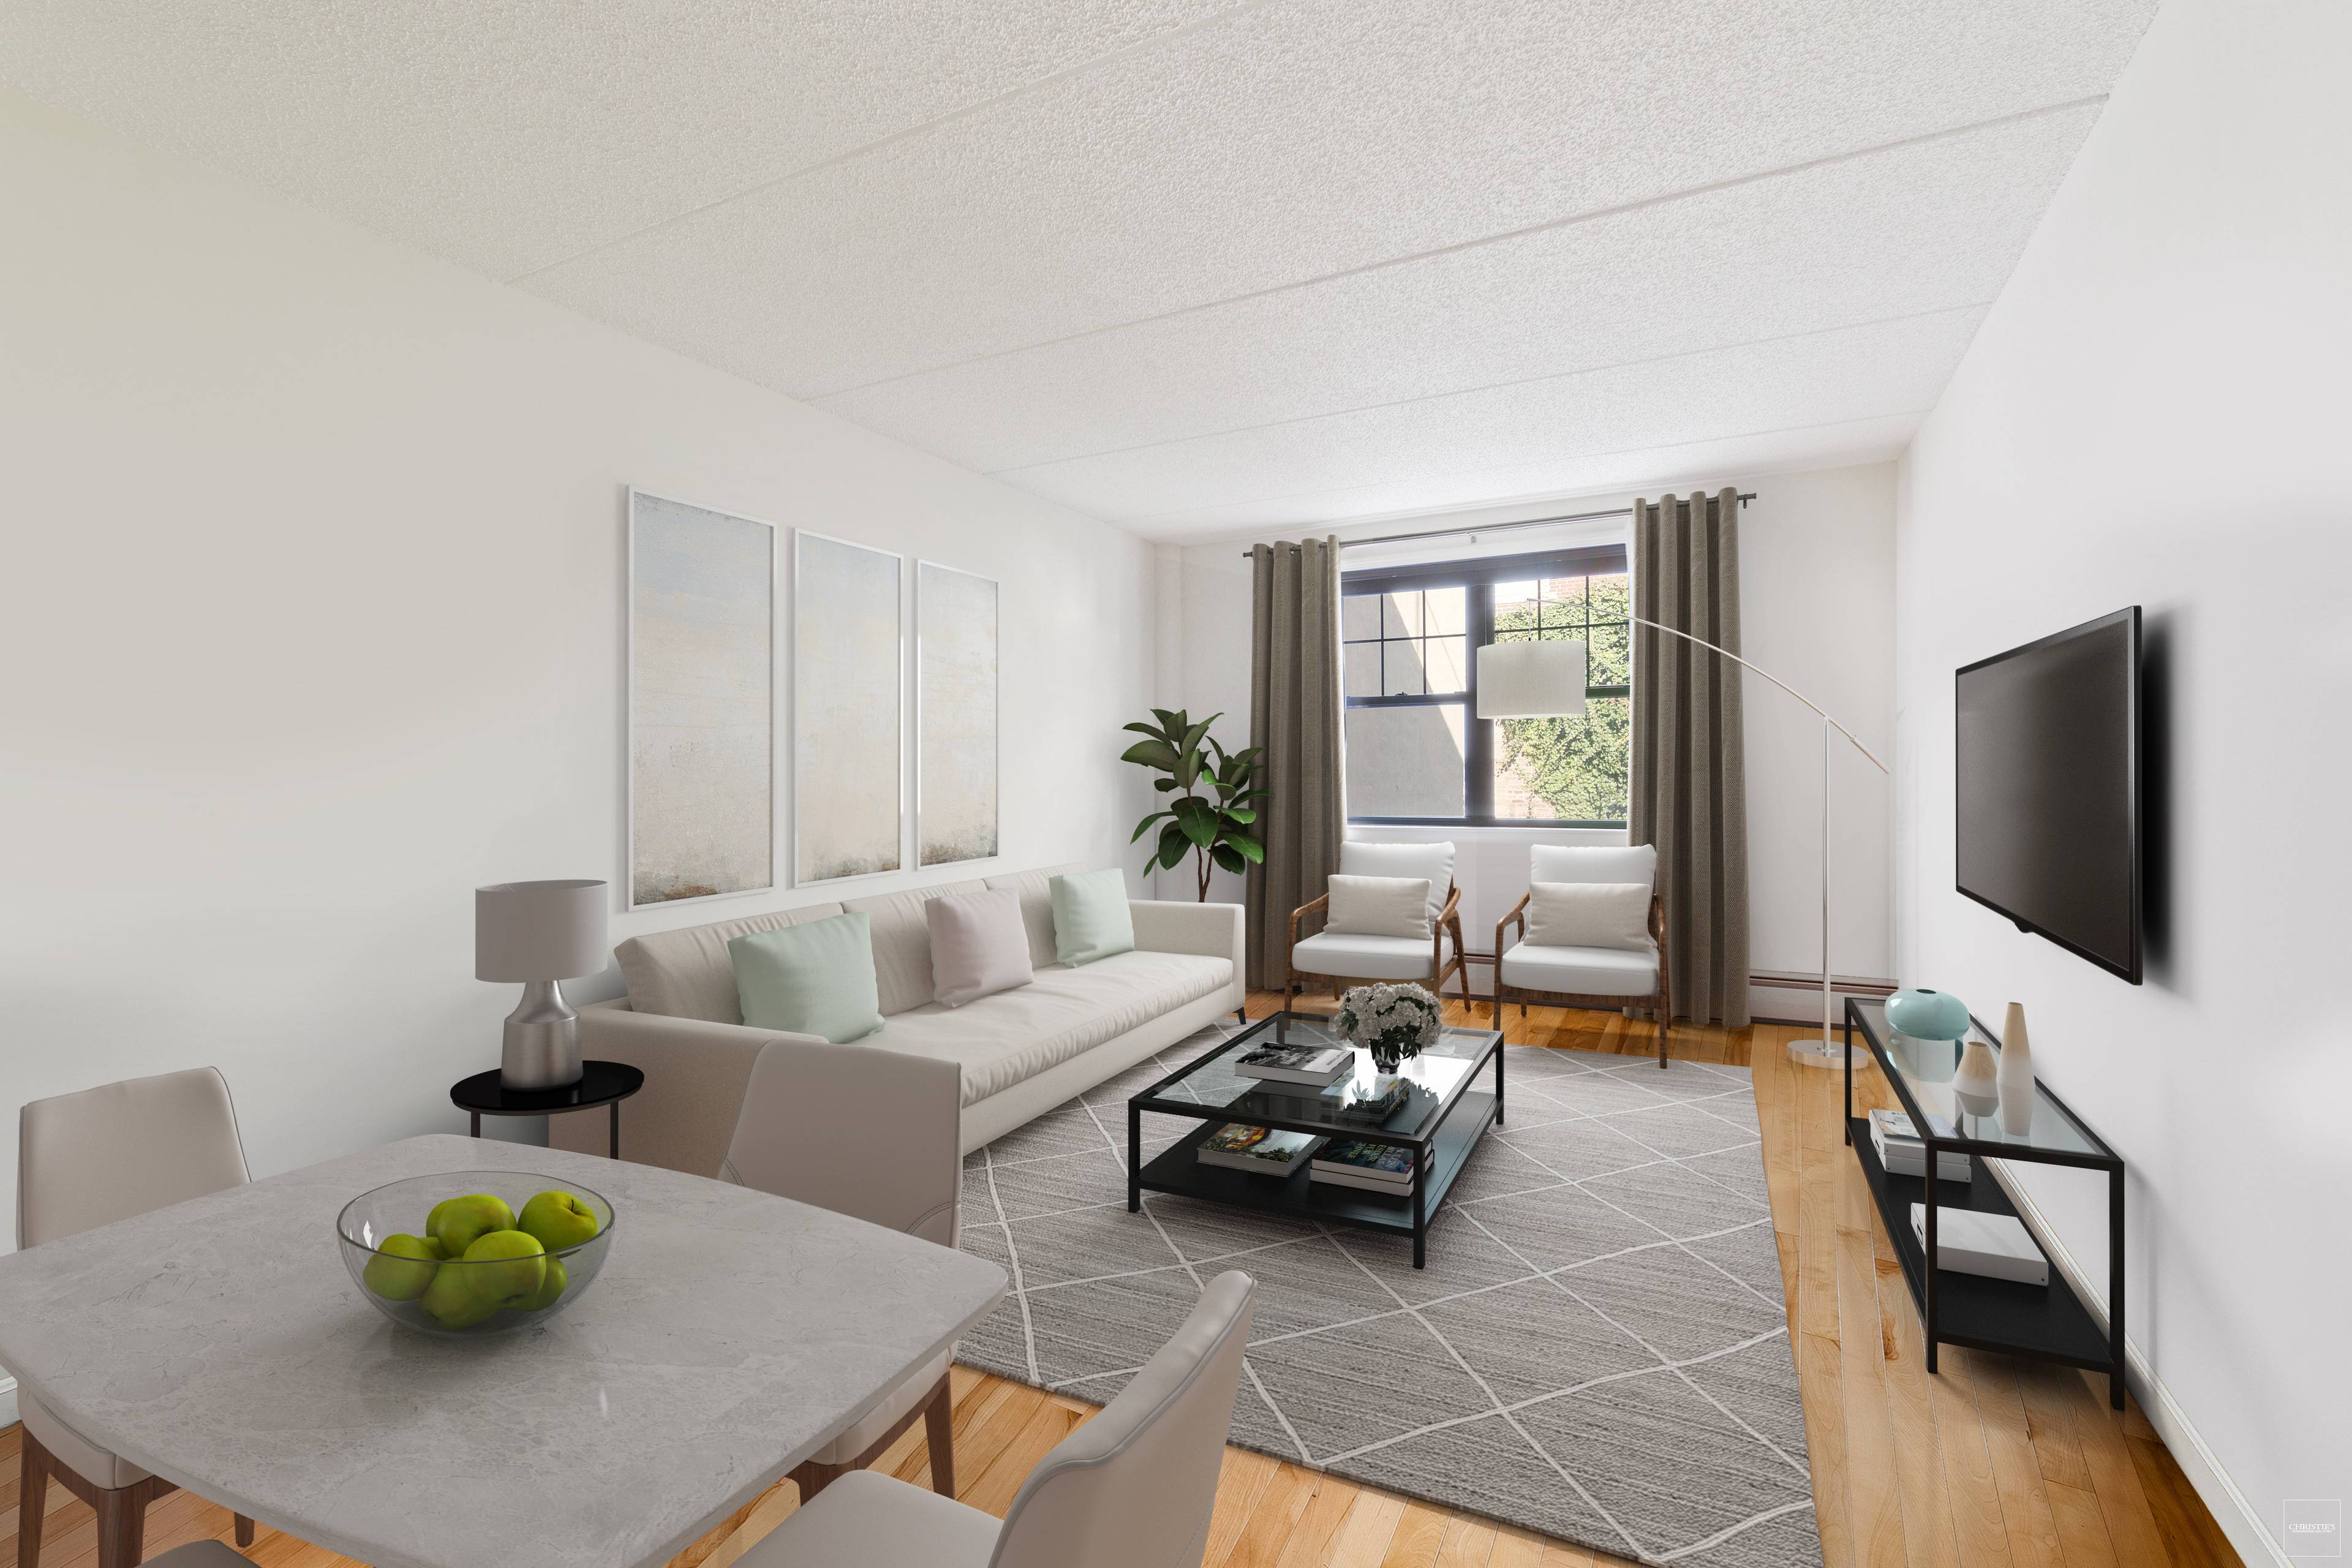 Townhouse 3 is situated in Alphabet City, one of the most vibrant neighborhoods in New York.